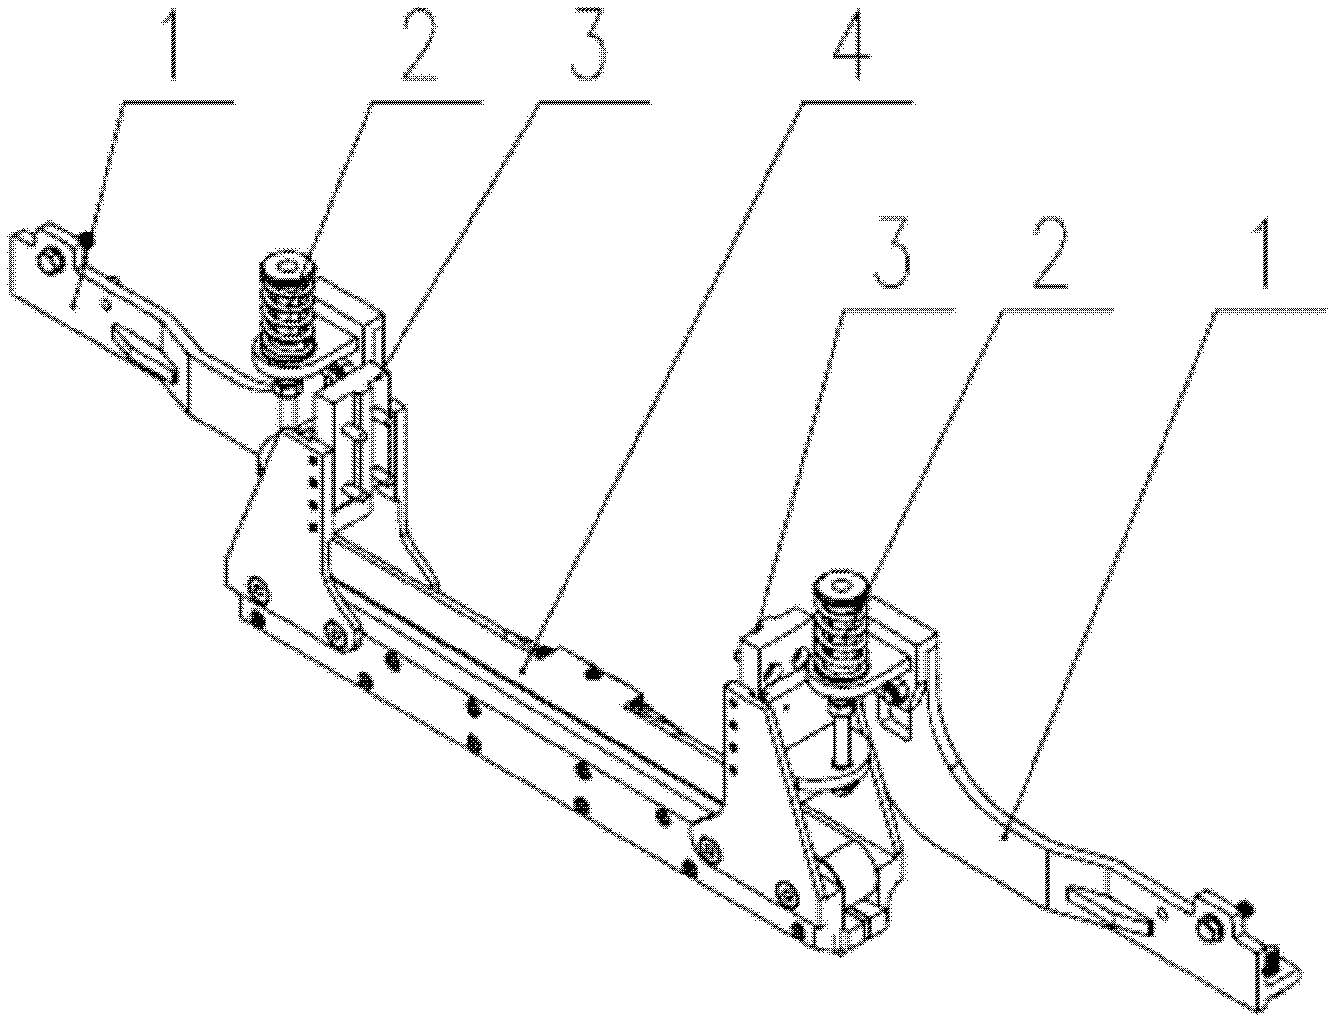 Connecting device of magnetic track brake and magnetic track brake apparatus